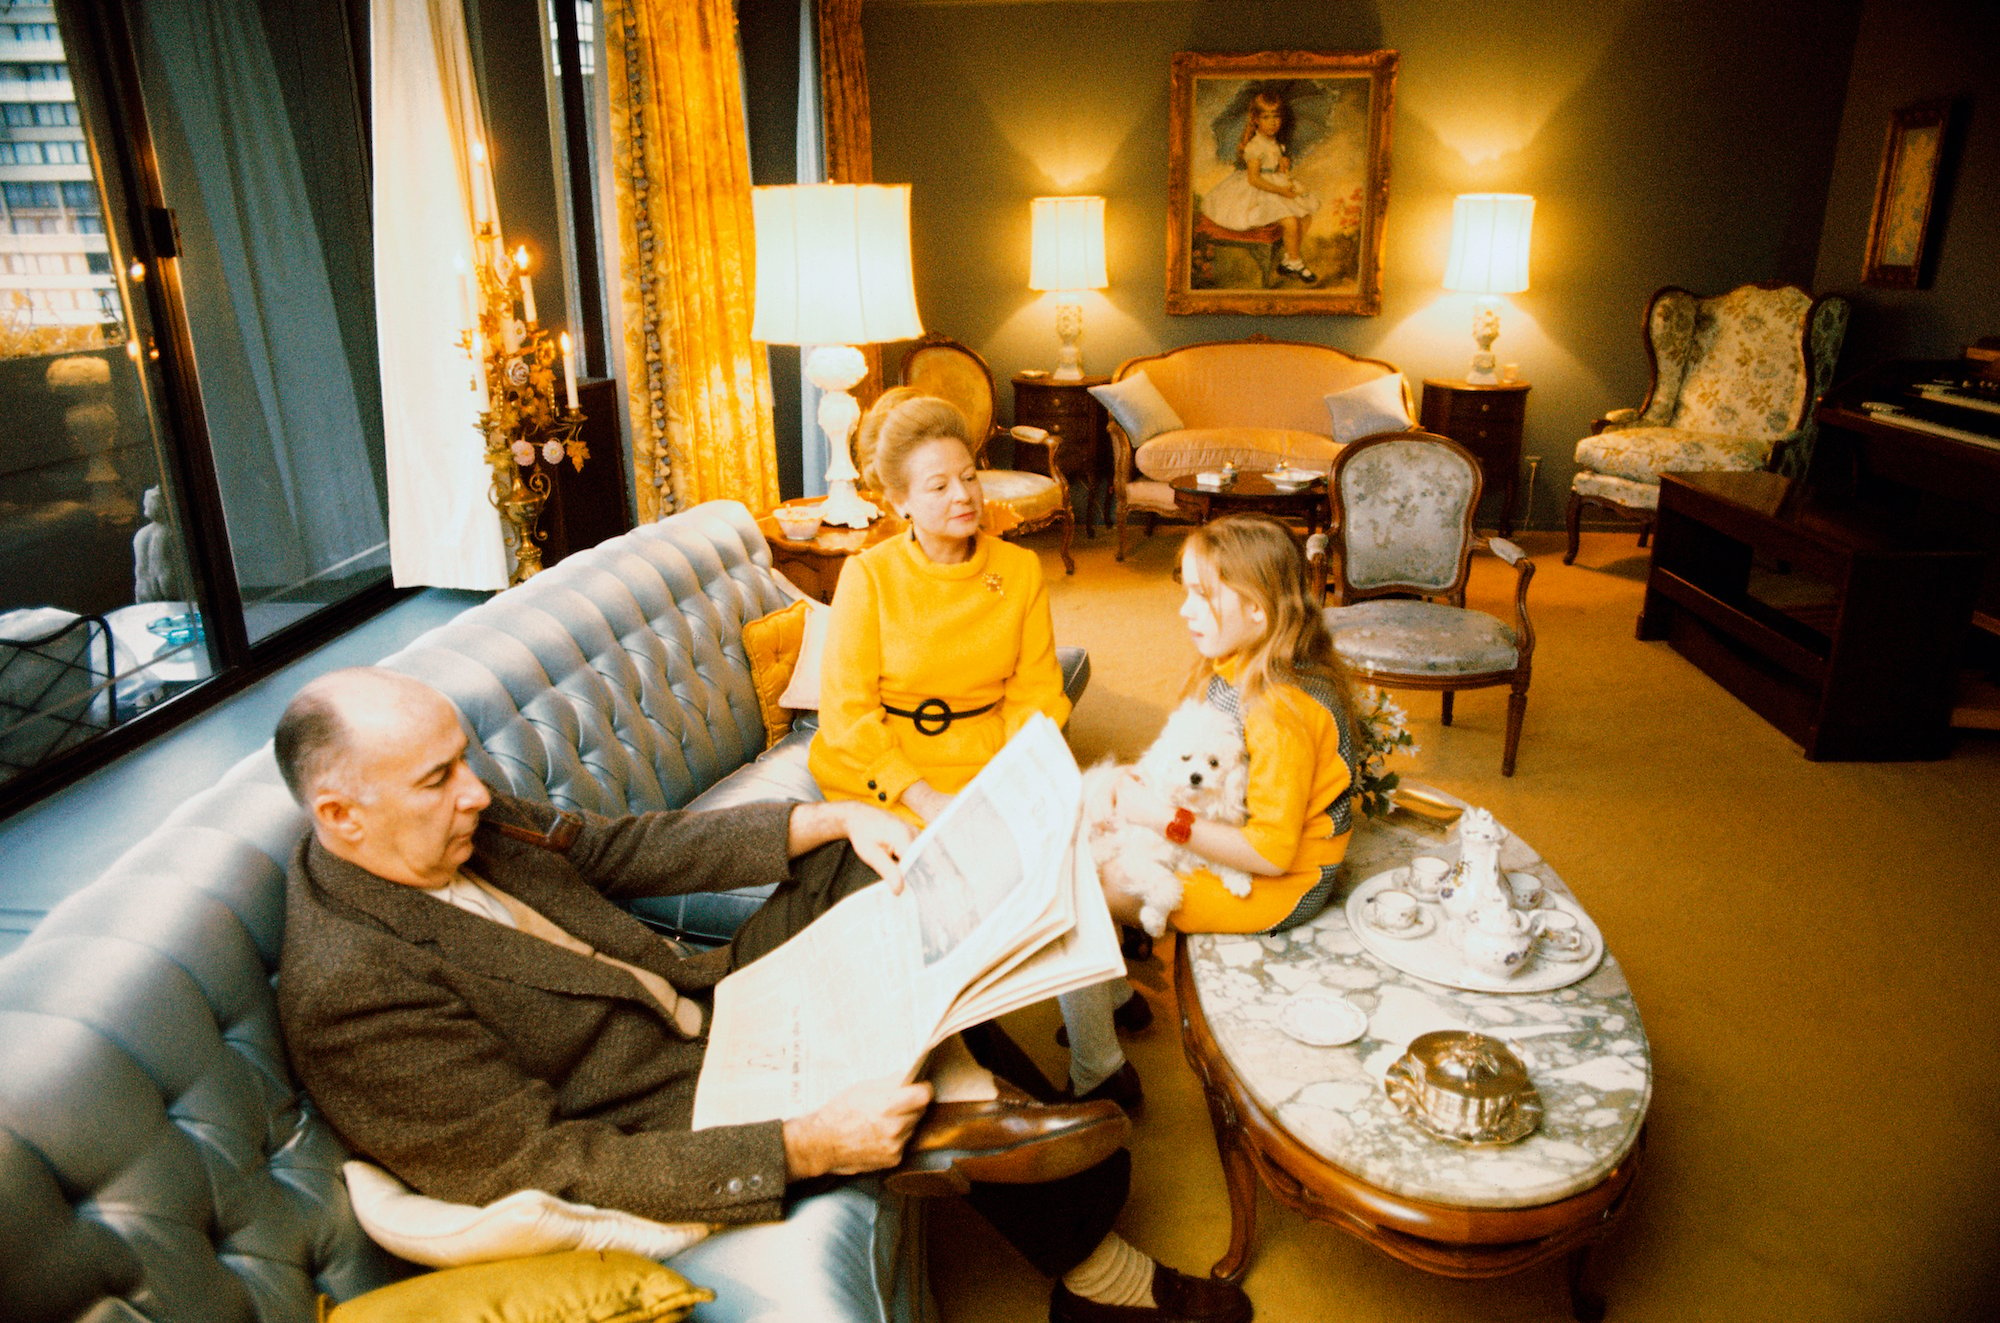 'Gaslit' subjects John Mitchell, Martha Mitchell and daughter Marti Mitchell sit together in their living room